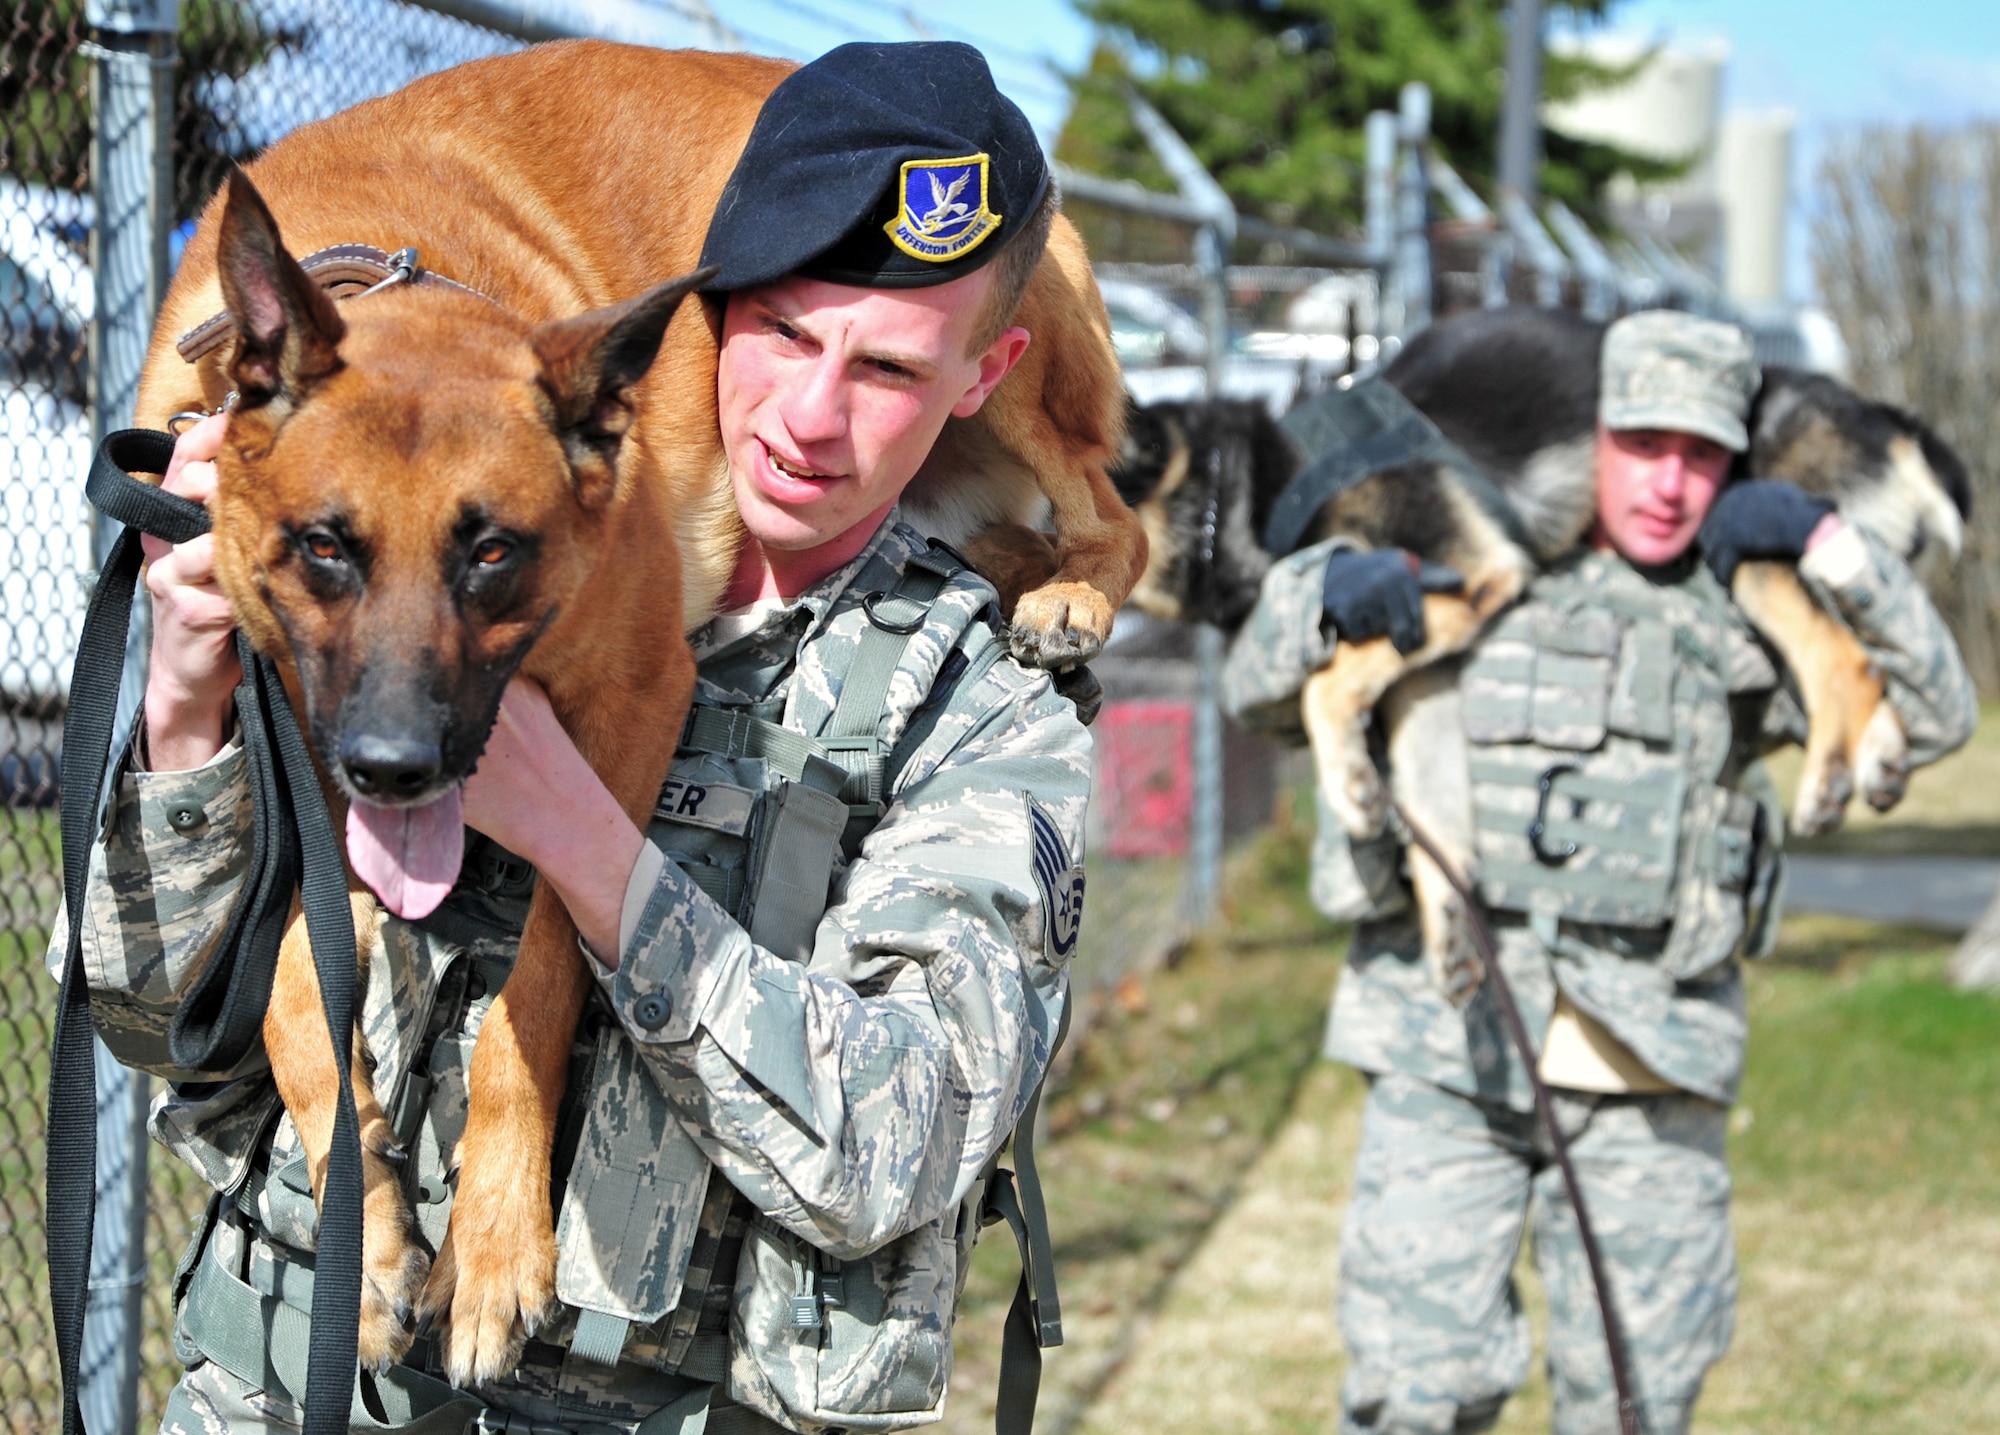 92nd Security Forces Squadron military working dog handlers display an over-the-shoulder carry with their K-9’s during a training session at Fairchild Air Force Base, Wash., March 21, 2013. The purpose of the carry is to keep the dog from being exhausted if it’s in need of medical care. (U.S. Air Force photo by Senior Airman Taylor Curry)